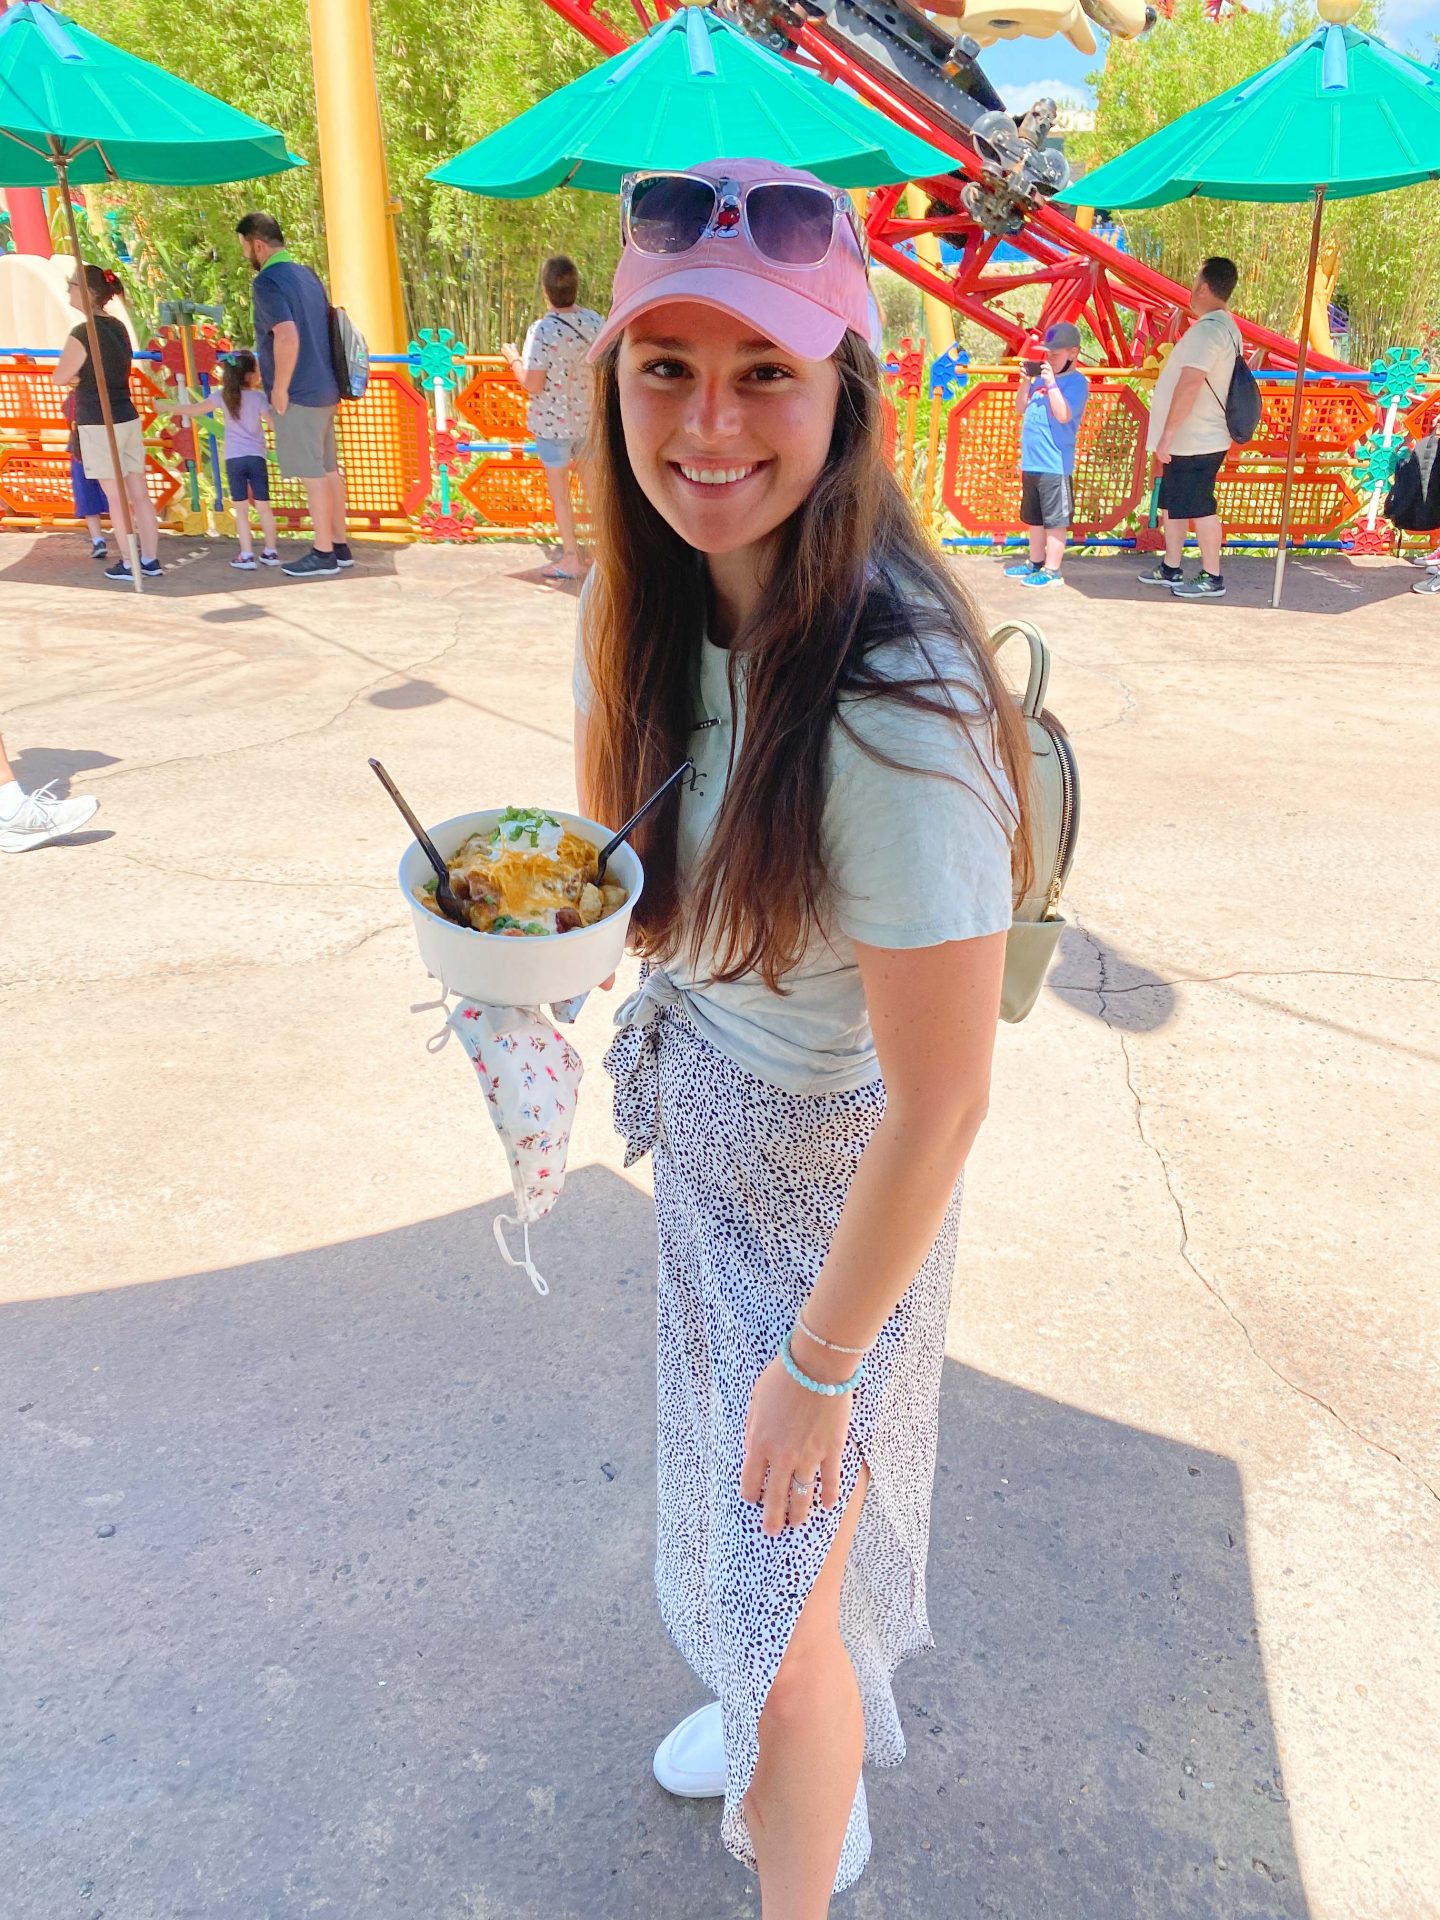 toy story land, woody's tots, tater tots Hollywood studios, magical, slinky, disney world, Florida, Orlando, wdw, walt disney world trip, what to do at Hollywood studios, slinky dog dash, woody's lunchbox, what to eat, blog, itinerary